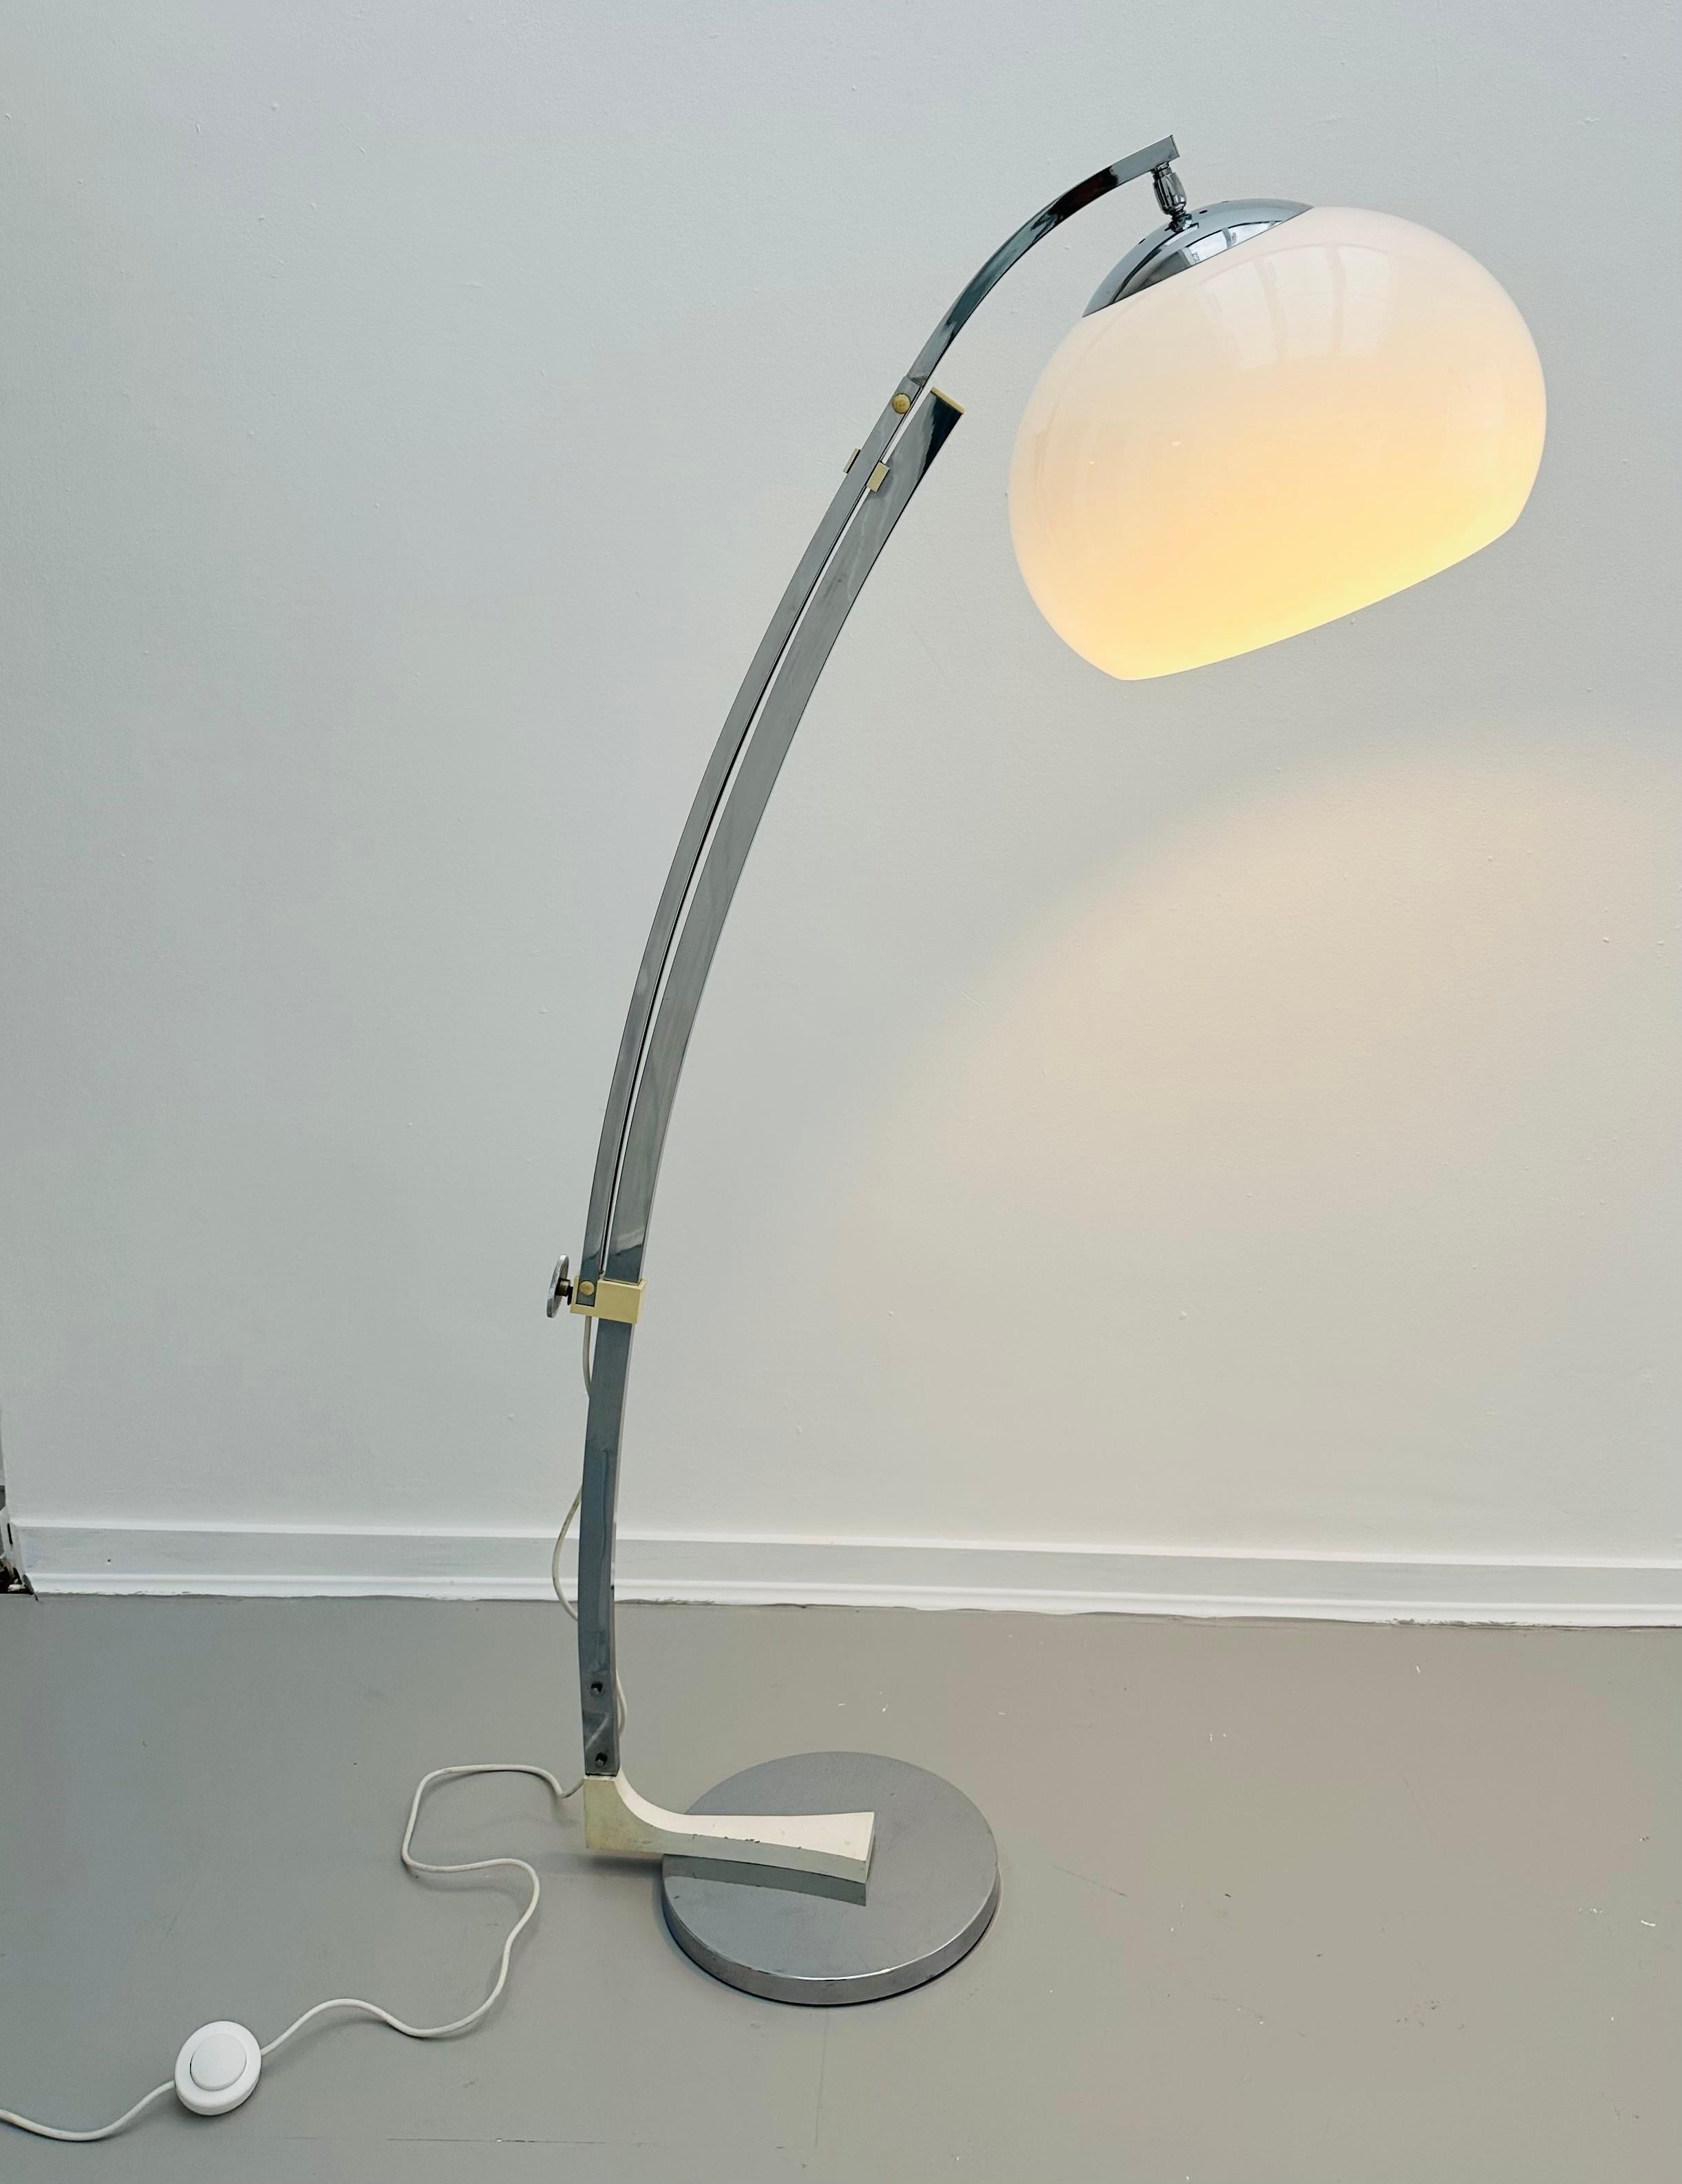 1960s German space-age, adjustable, polished chrome arc floor lamp manufactured by Sölken Leuchten. The height is adjustable and held in place by a large feature chrome screw knob which slides up and down the lower metal supporting section which is